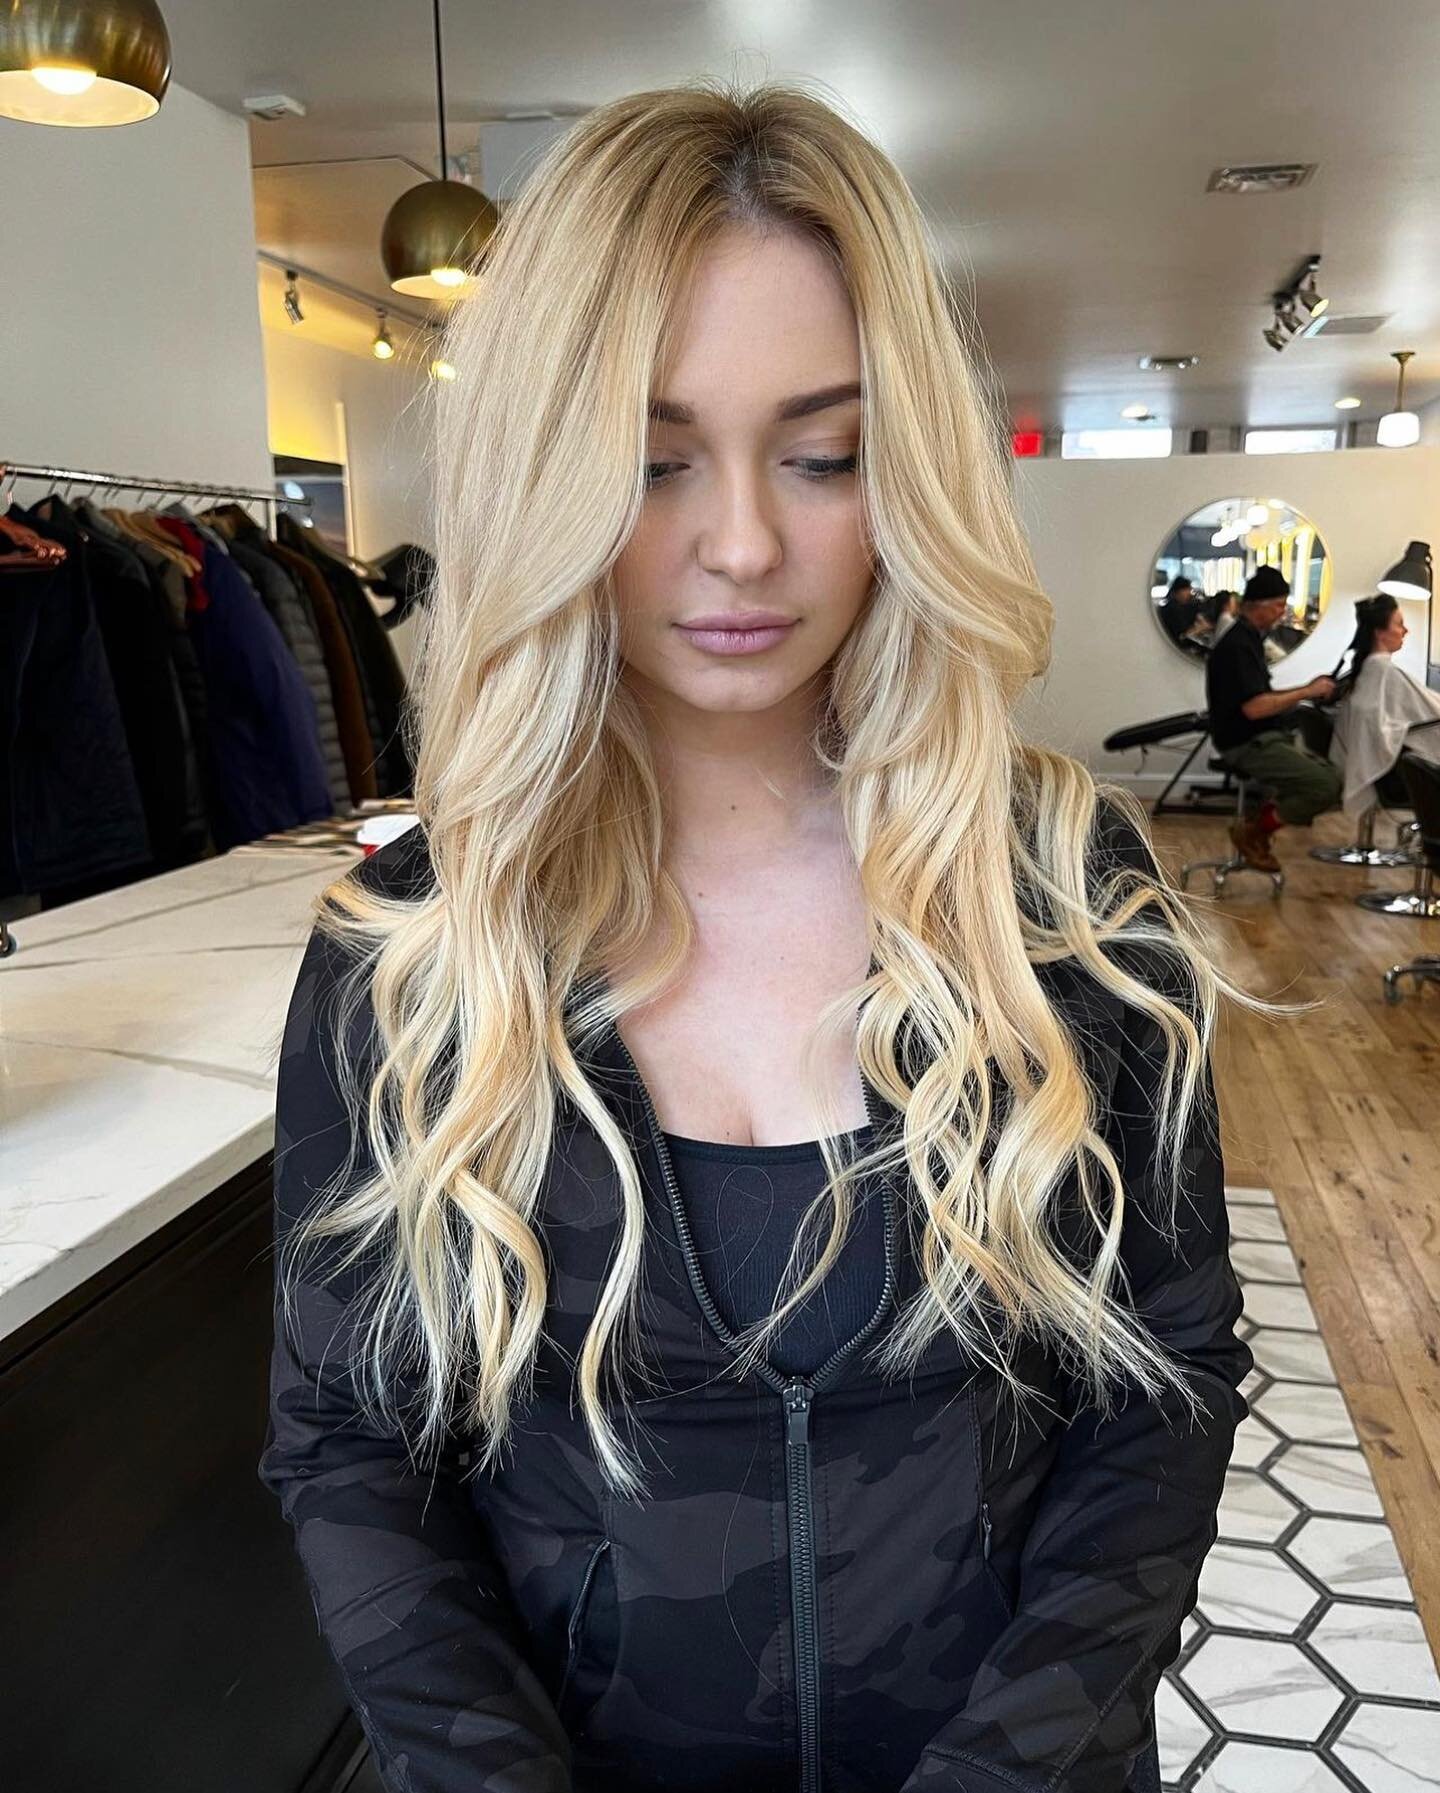 Have you ever wanted longer, fuller hair? Does your hair grow to a length and then just &ldquo; give up &ldquo;? @hairrby.kylee is now offering hand tied sew in hair extensions, and so far the response is amazing. We use high quality hair that can be